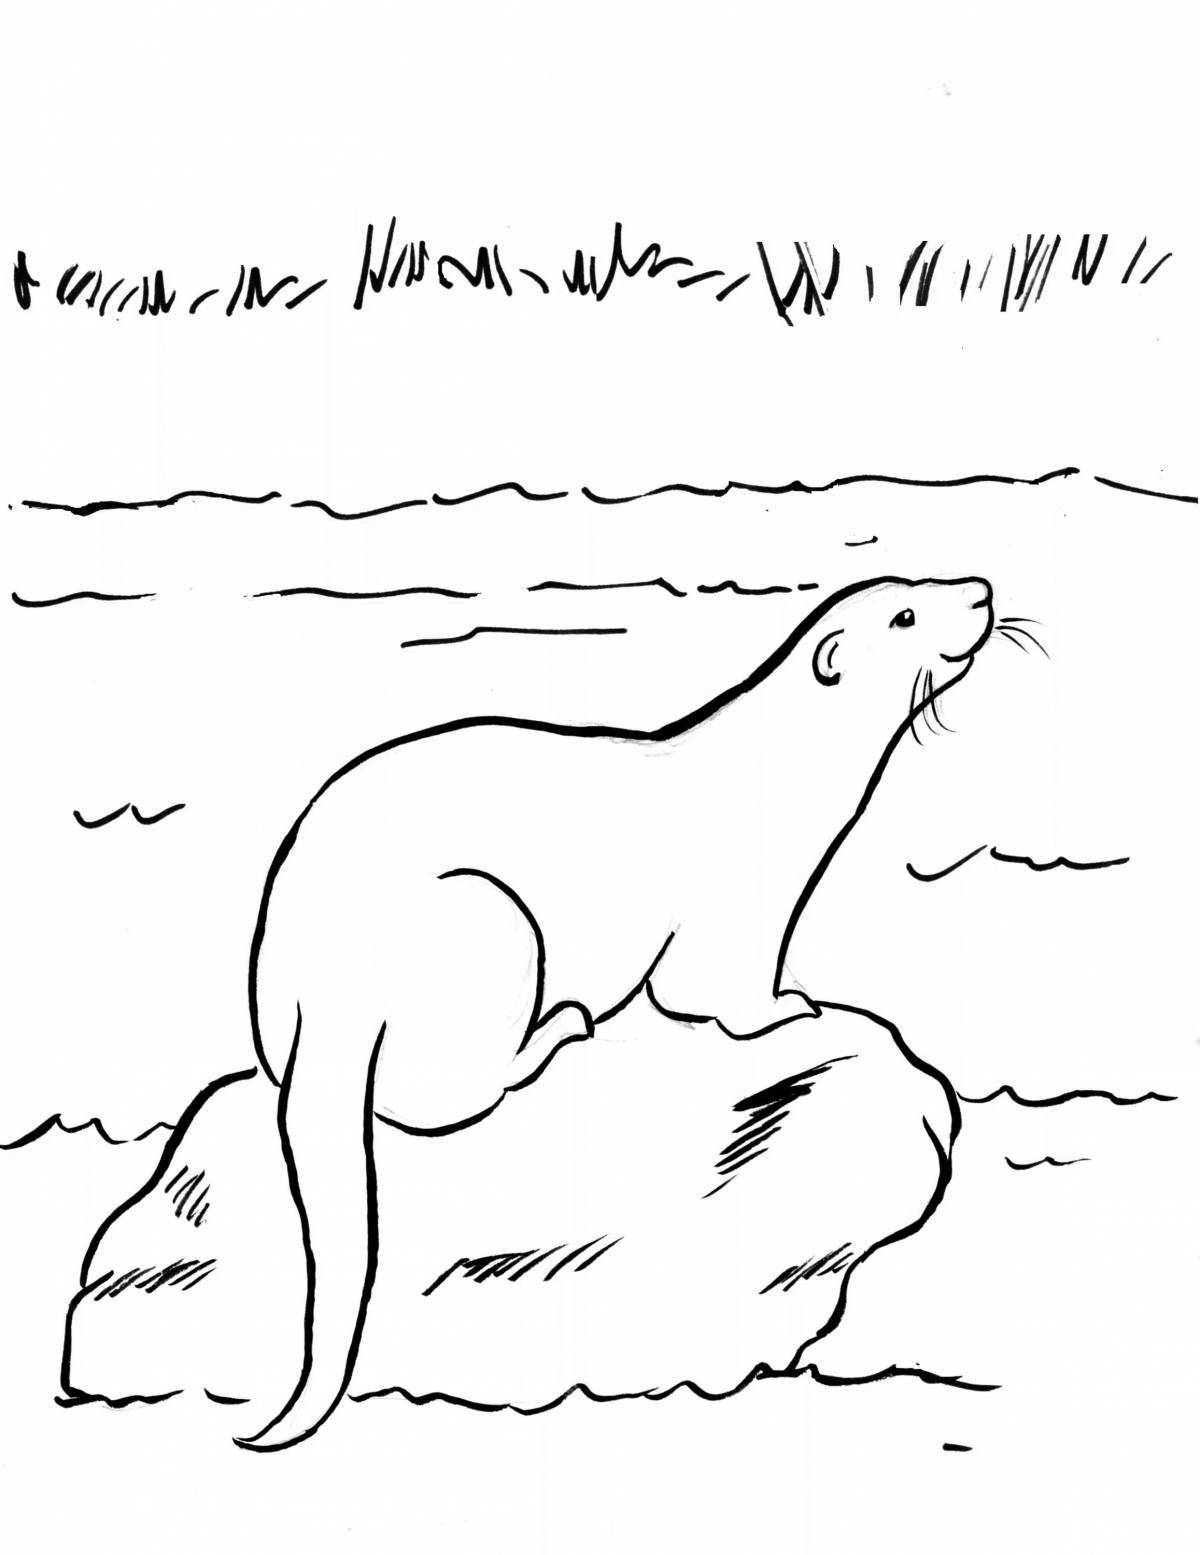 Cute river otter coloring page